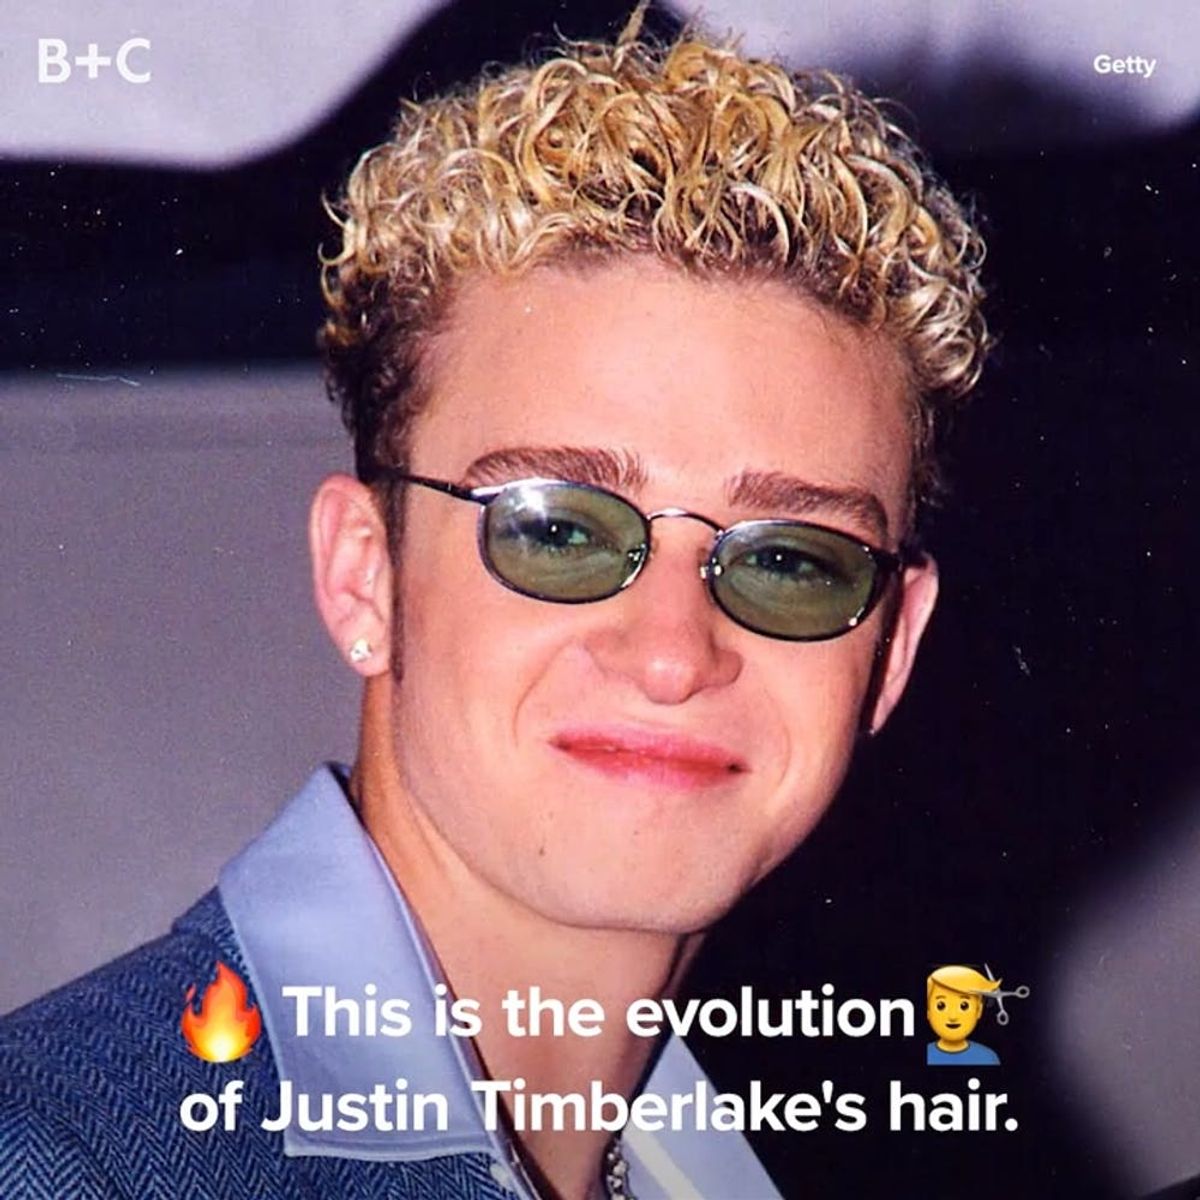 The Epic Evolution of Justin Timberlake’s Hair